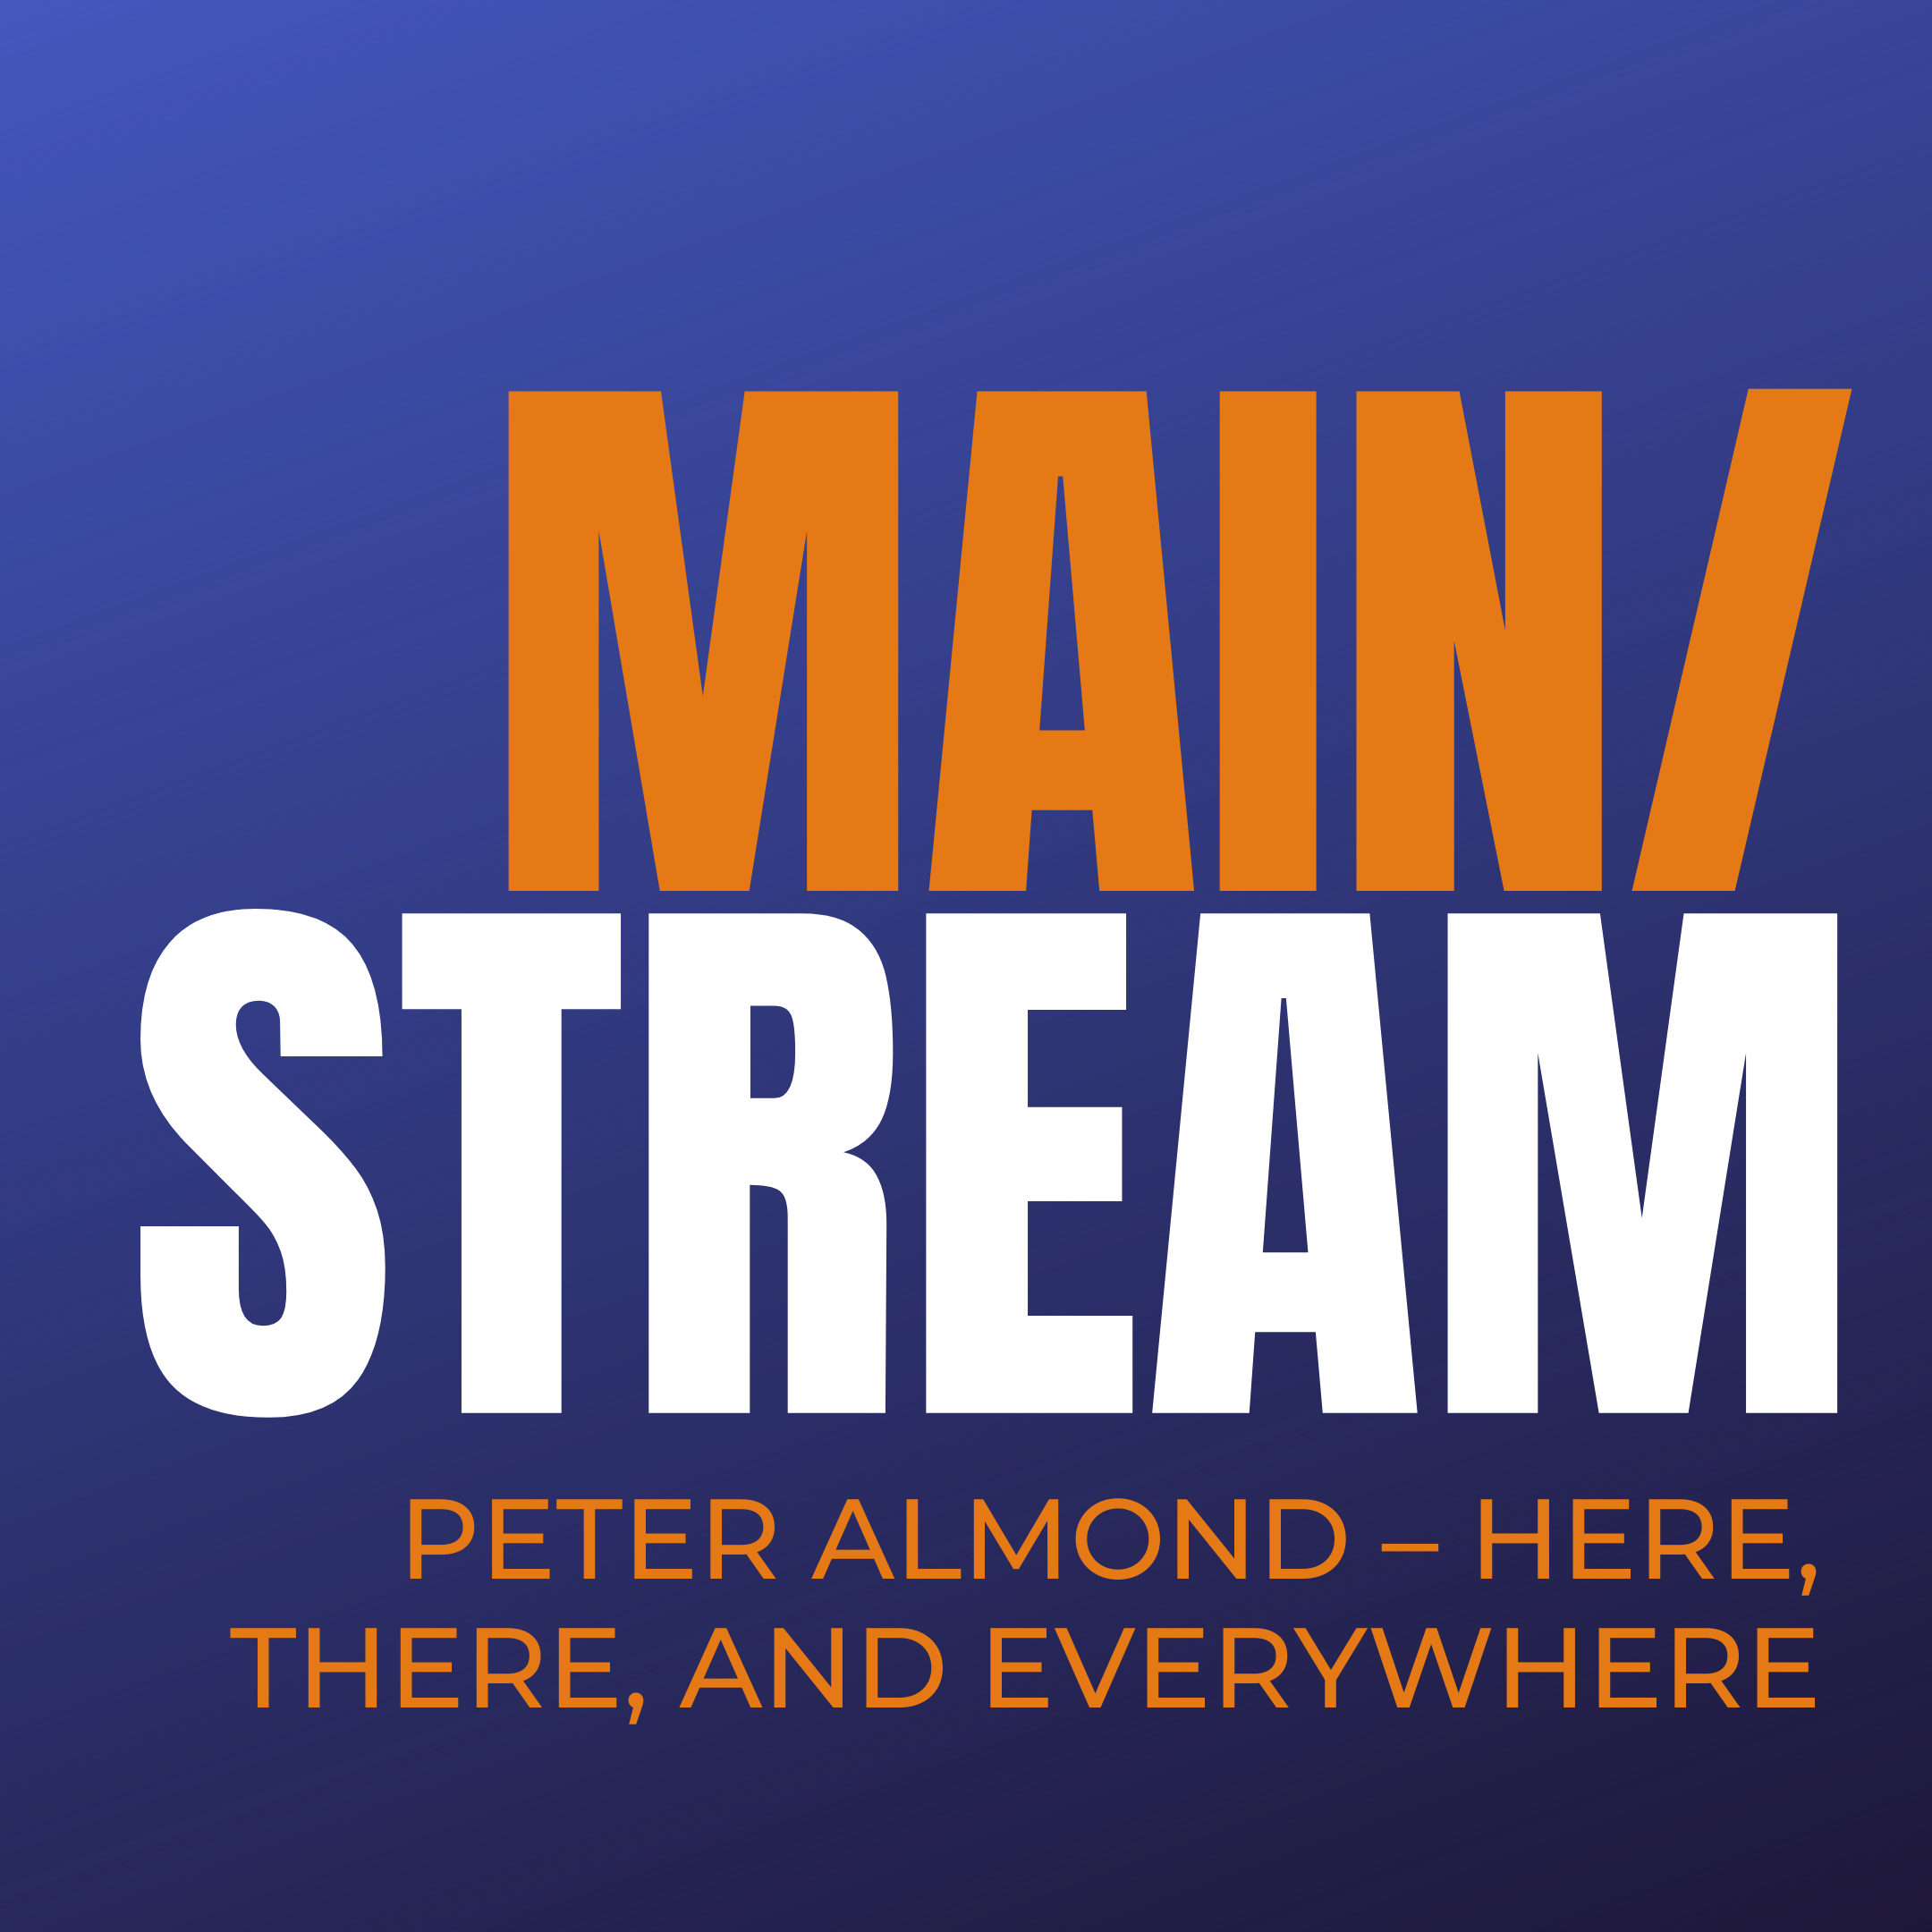 MAIN/STREAM: Peter Almond - Here, There, and Everywhere